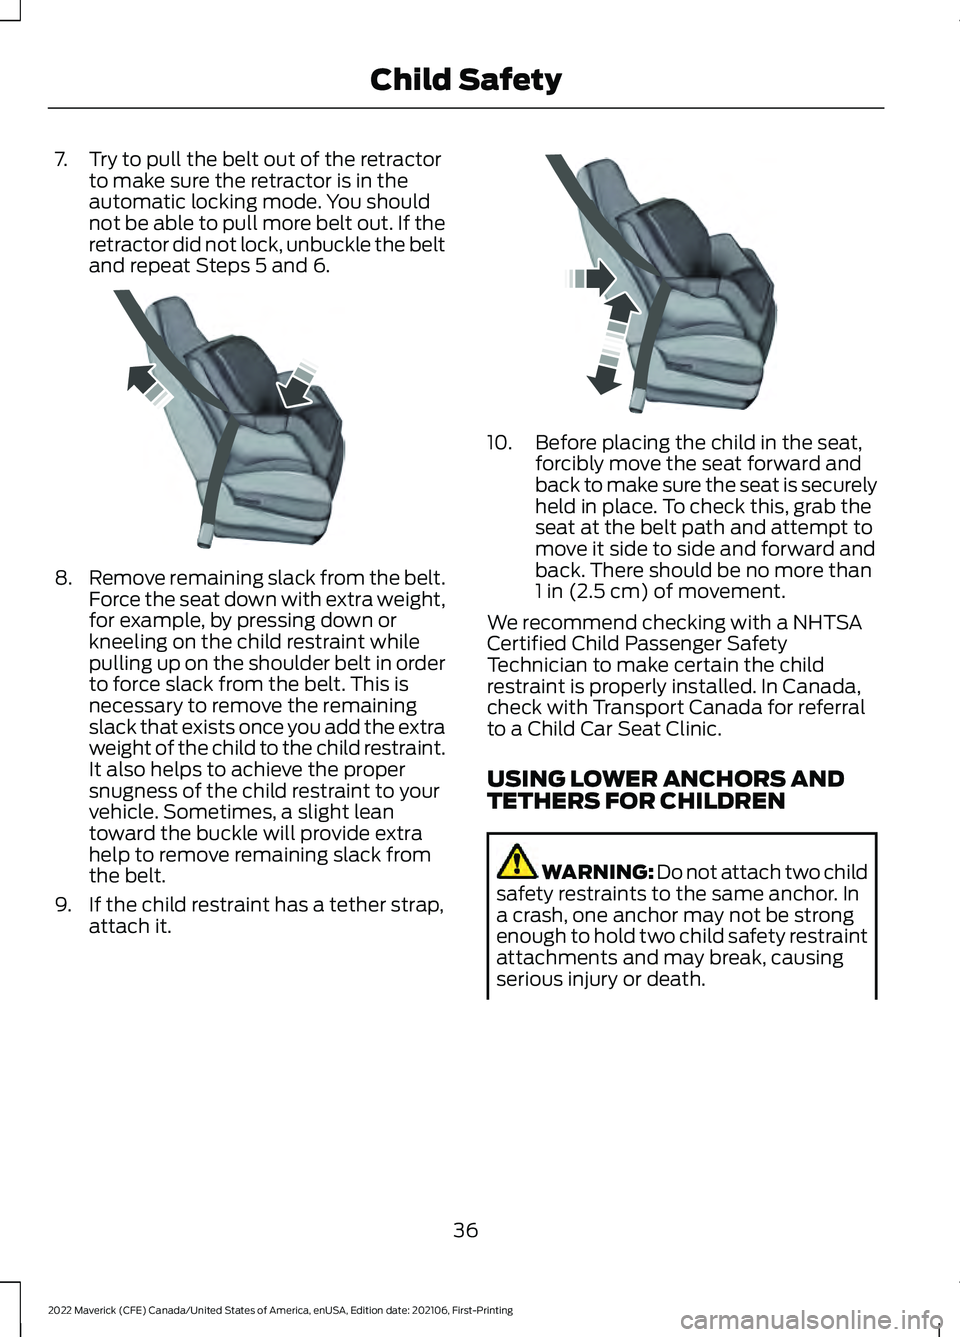 FORD MAVERICK 2022  Owners Manual 7. Try to pull the belt out of the retractor
to make sure the retractor is in the
automatic locking mode. You should
not be able to pull more belt out. If the
retractor did not lock, unbuckle the belt